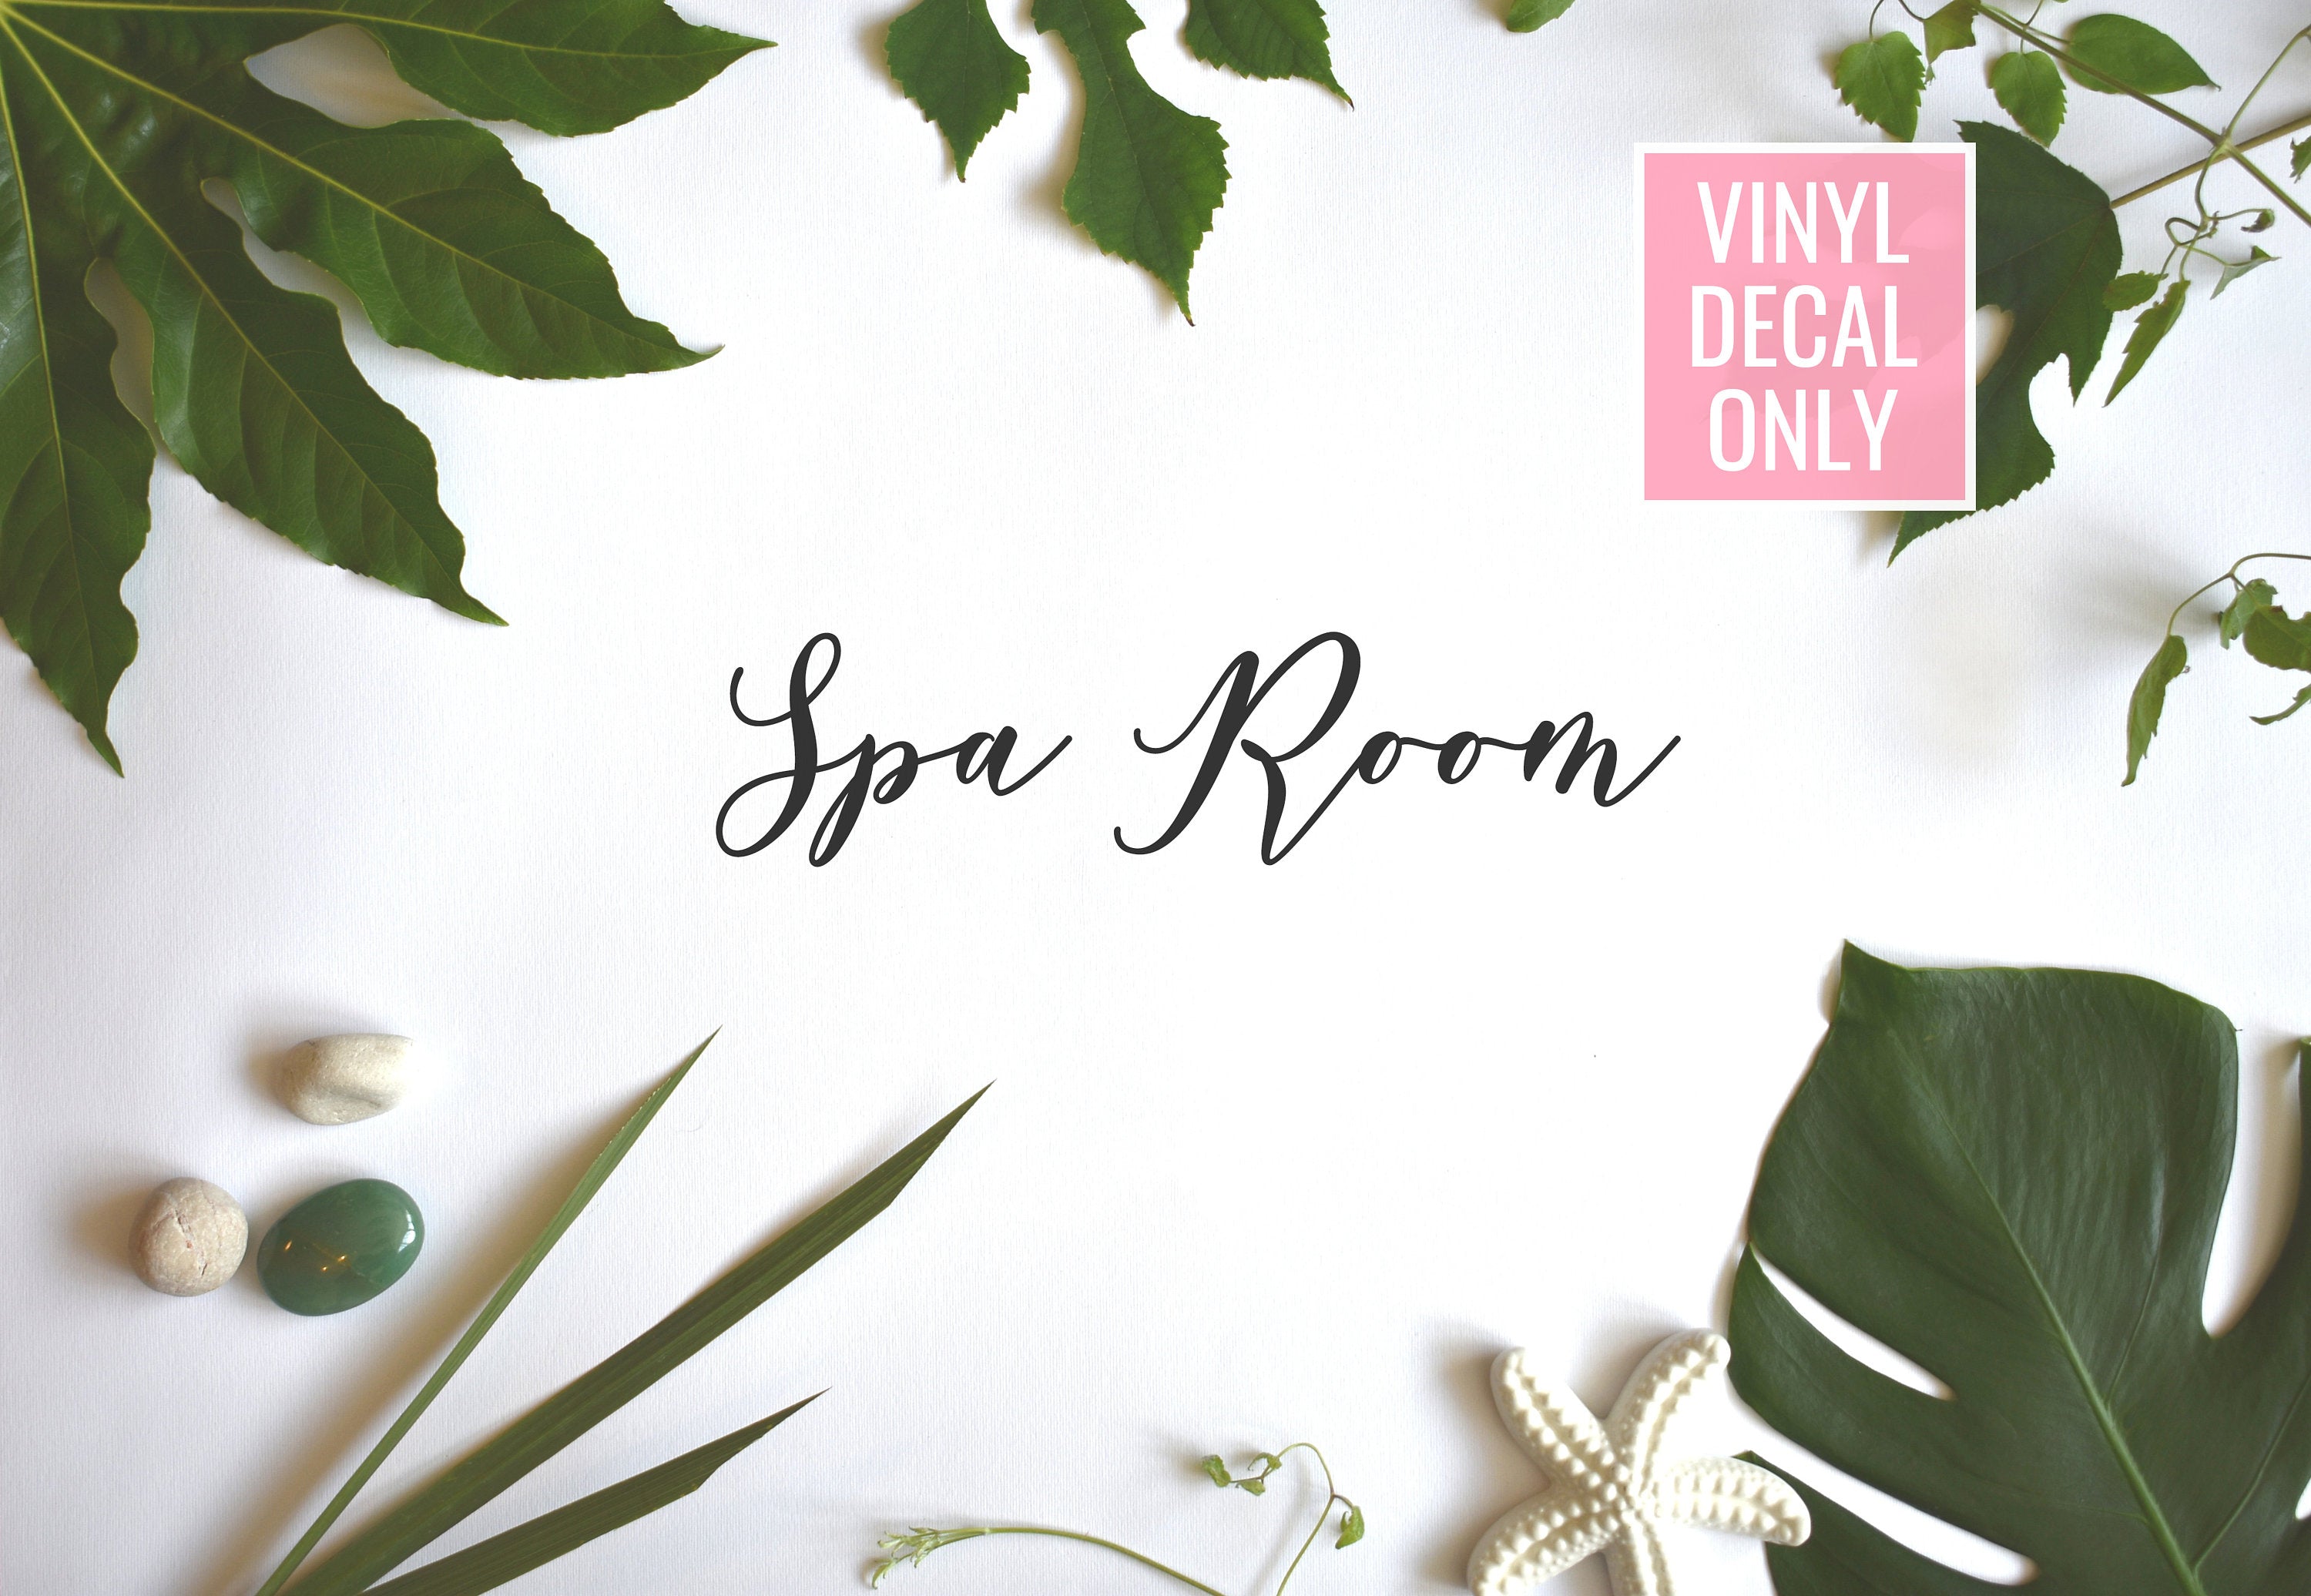 Spa Room Decal - Vinyl Decals for Hotels, Shops, Spa, Hair Salon, Barber Shop, Restaurants, Businesses, and More!